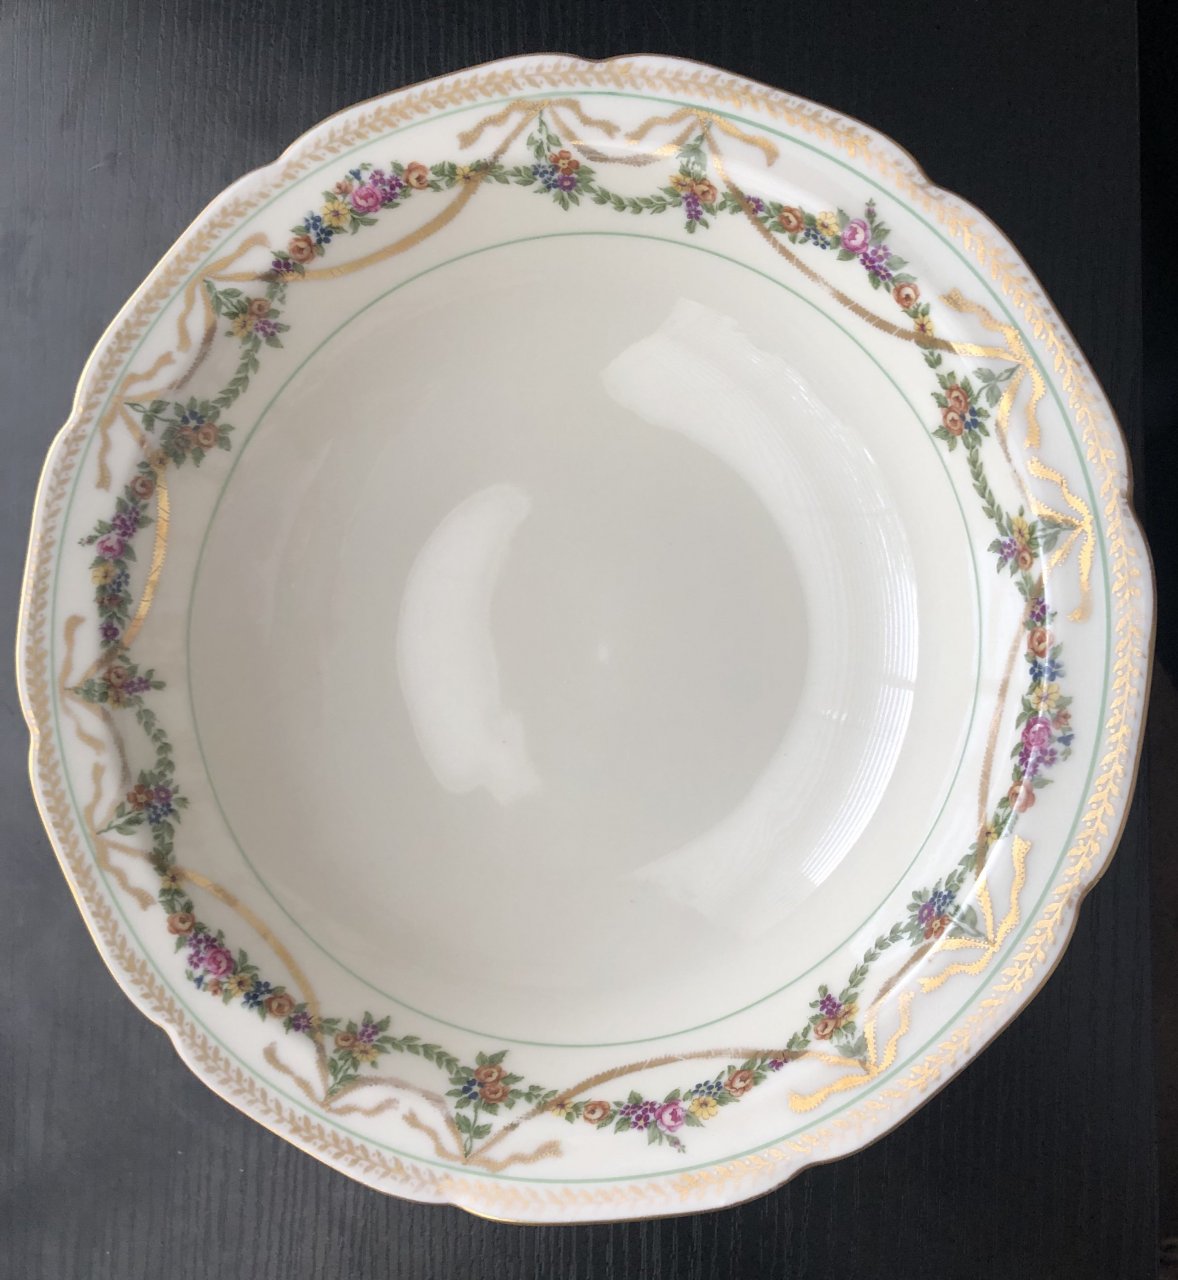 Epiag Royal China From Czechoslovakia | My Antique Furniture Collection